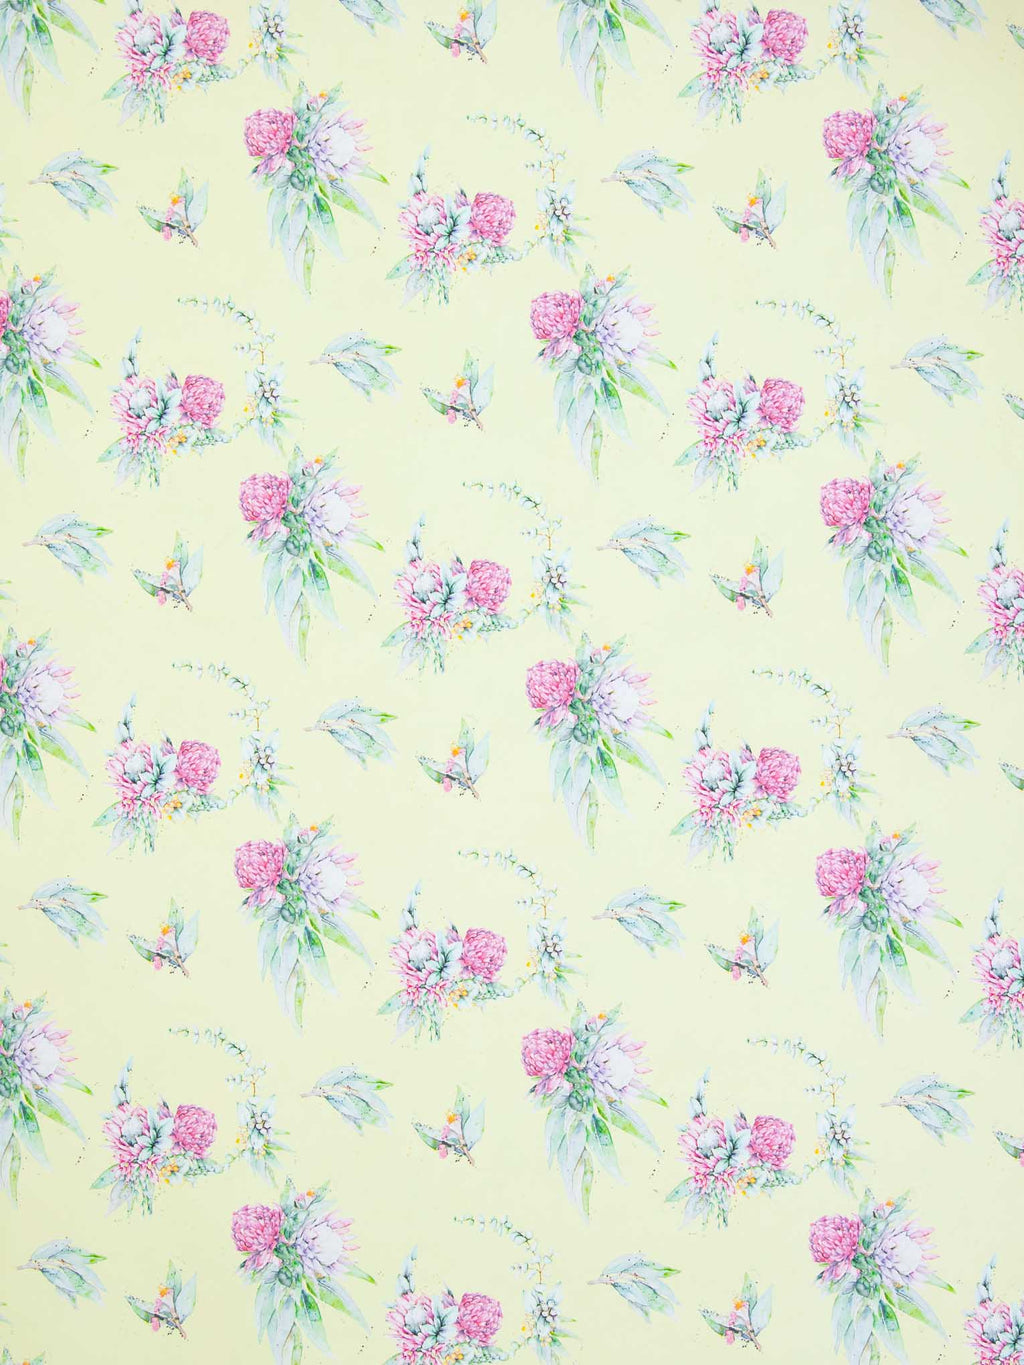 Mint Floral Wrapping Paper  Floral wrapping paper, Pattern illustration,  Pattern art